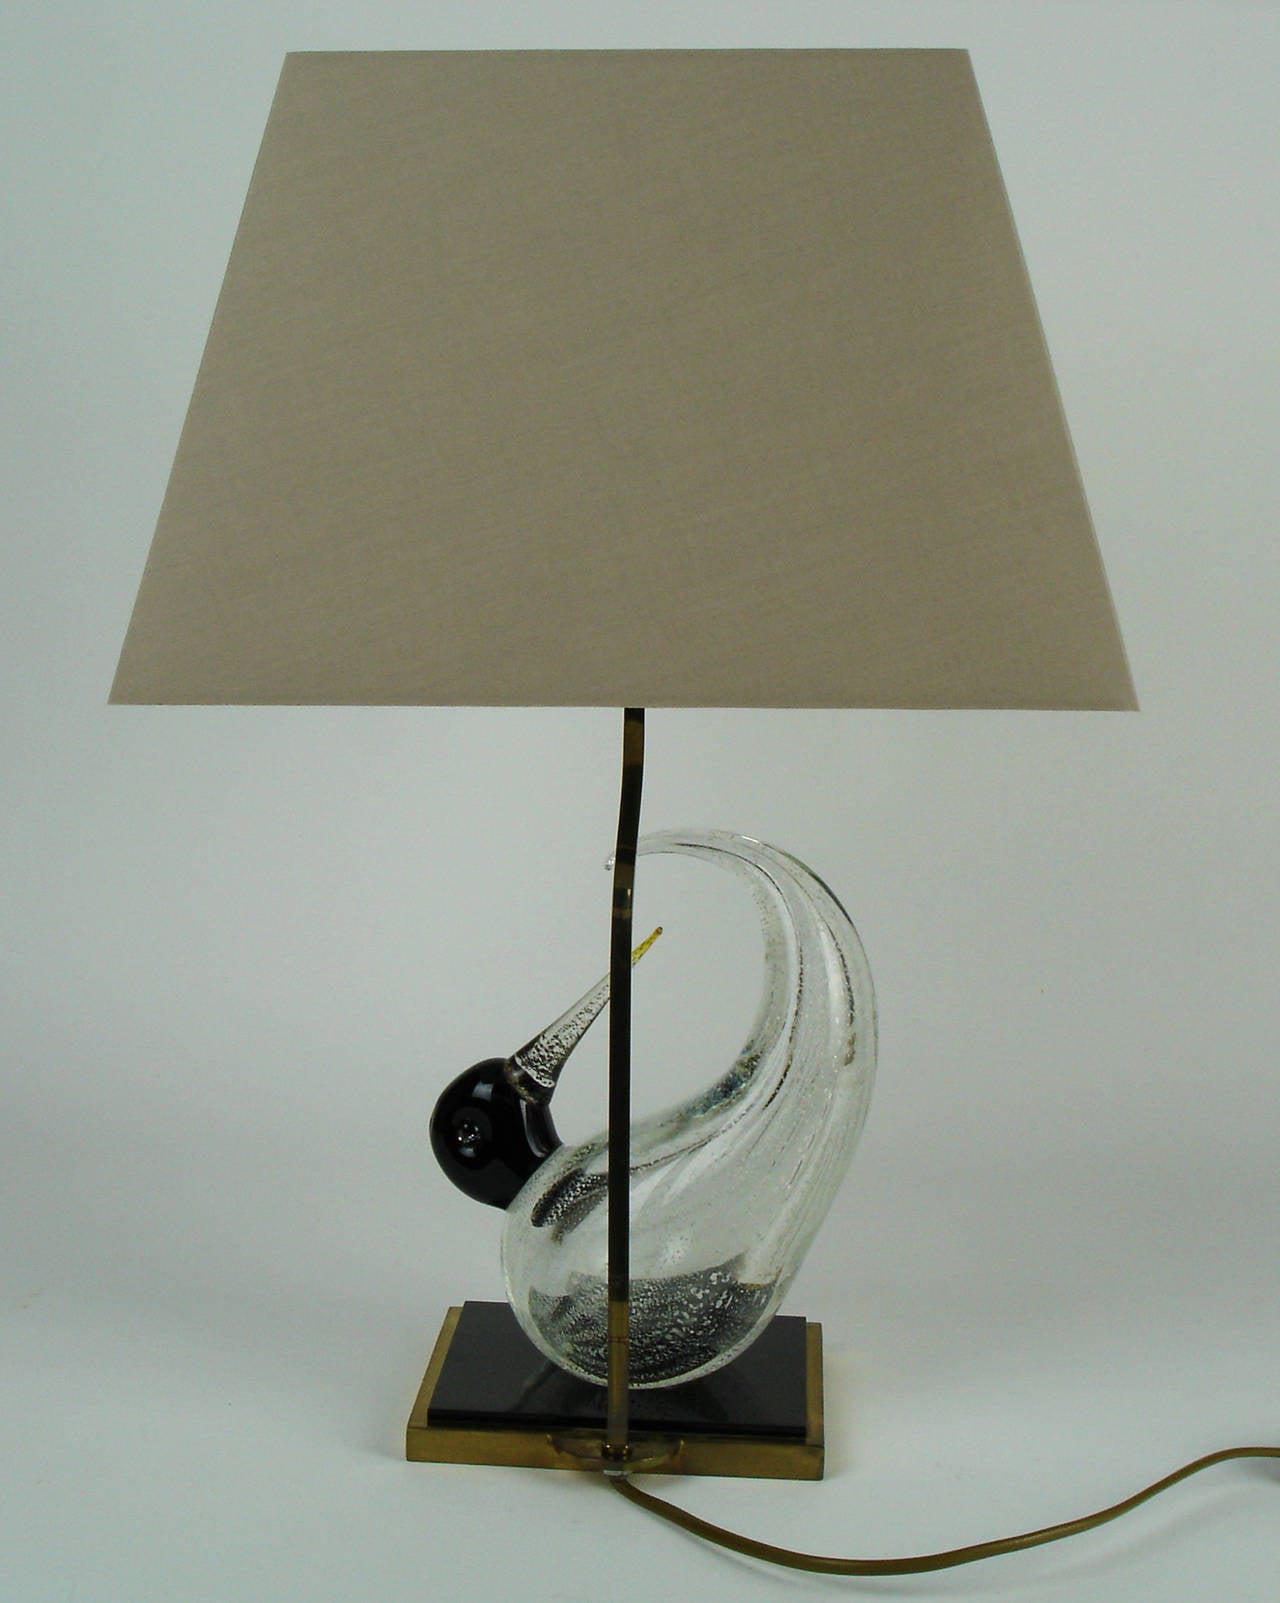 A Table lamp with a brass & black plexiglass fitting and a hand blow glass Murano Venini bird.New lamp shade.